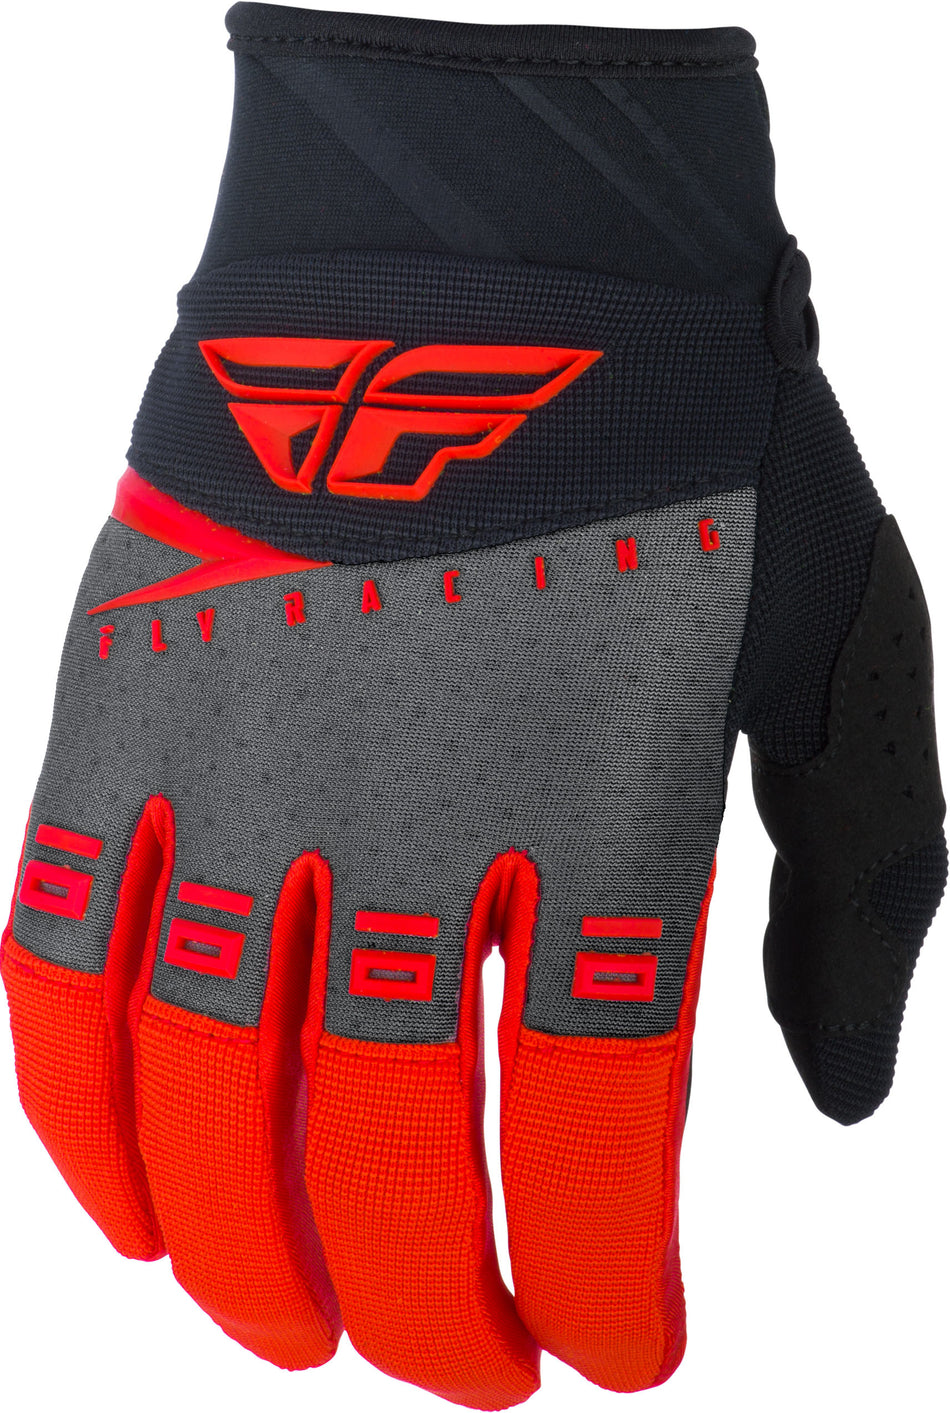 FLY RACING F-16 Gloves Red/Black Grey Sz 10 372-91210